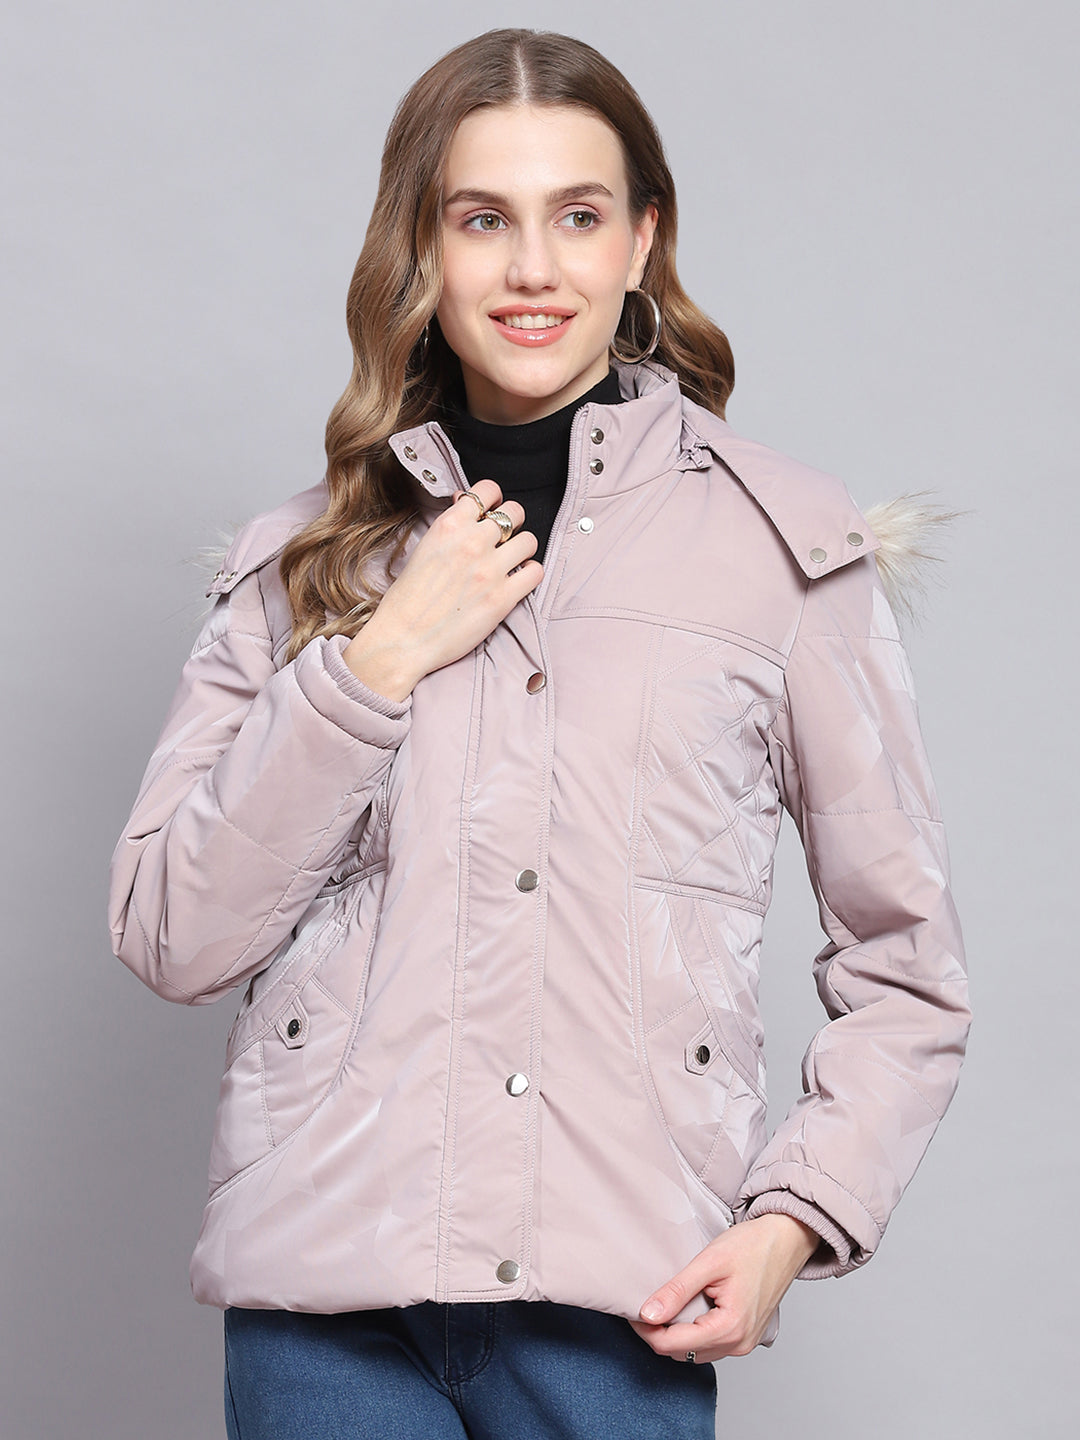 Buy MONTE CARLO Womens Band Collar Check Jacket | Shoppers Stop